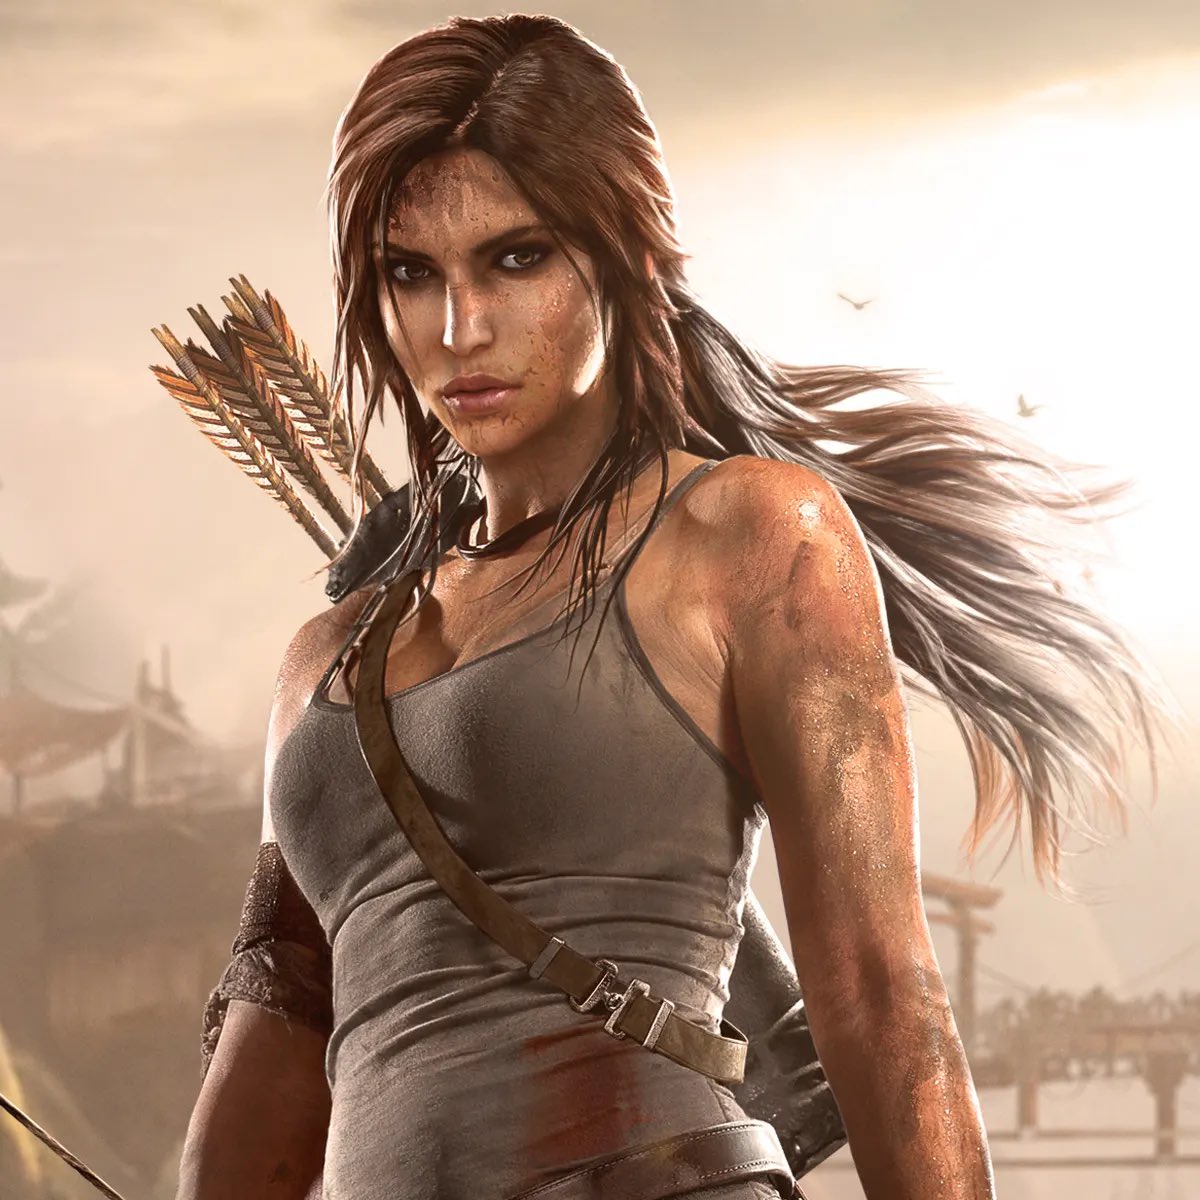 I just heard that Amazon is making a Tomb Raider series.

#CastingDirectorGame
It’s your job to cast Lara Croft for the Amazon Tomb Raider series. Who do you cast? #SHPOLL23